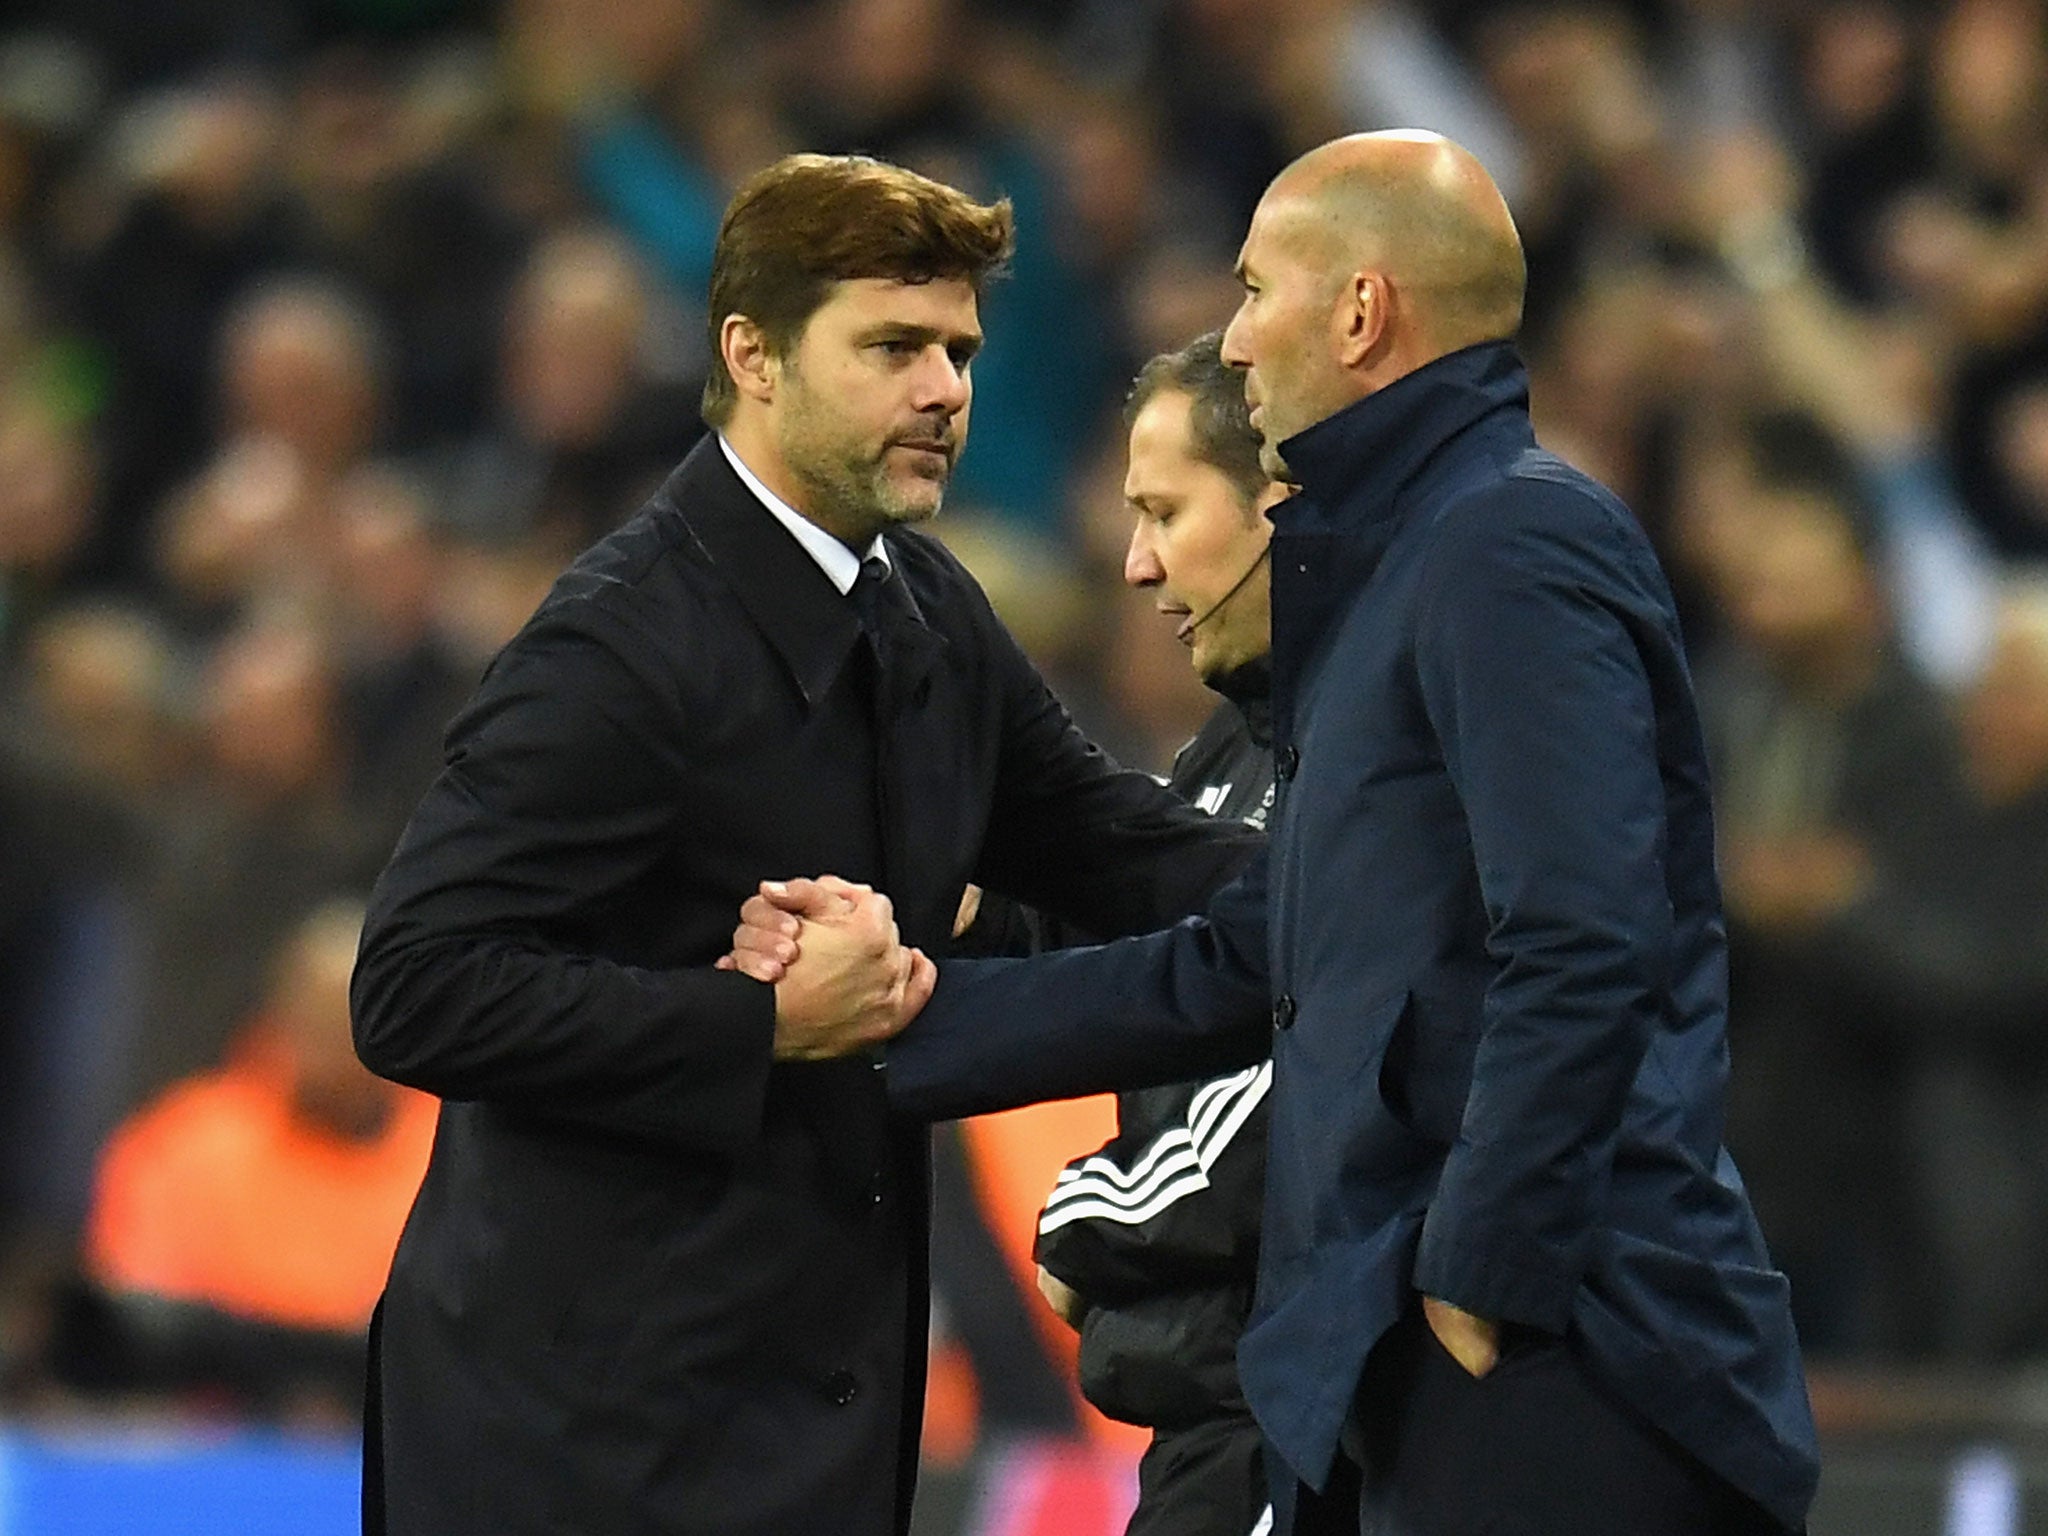 Mauricio Pochettino with Real Madrid manager Zinedine Zidane after the final whistle at Wembley